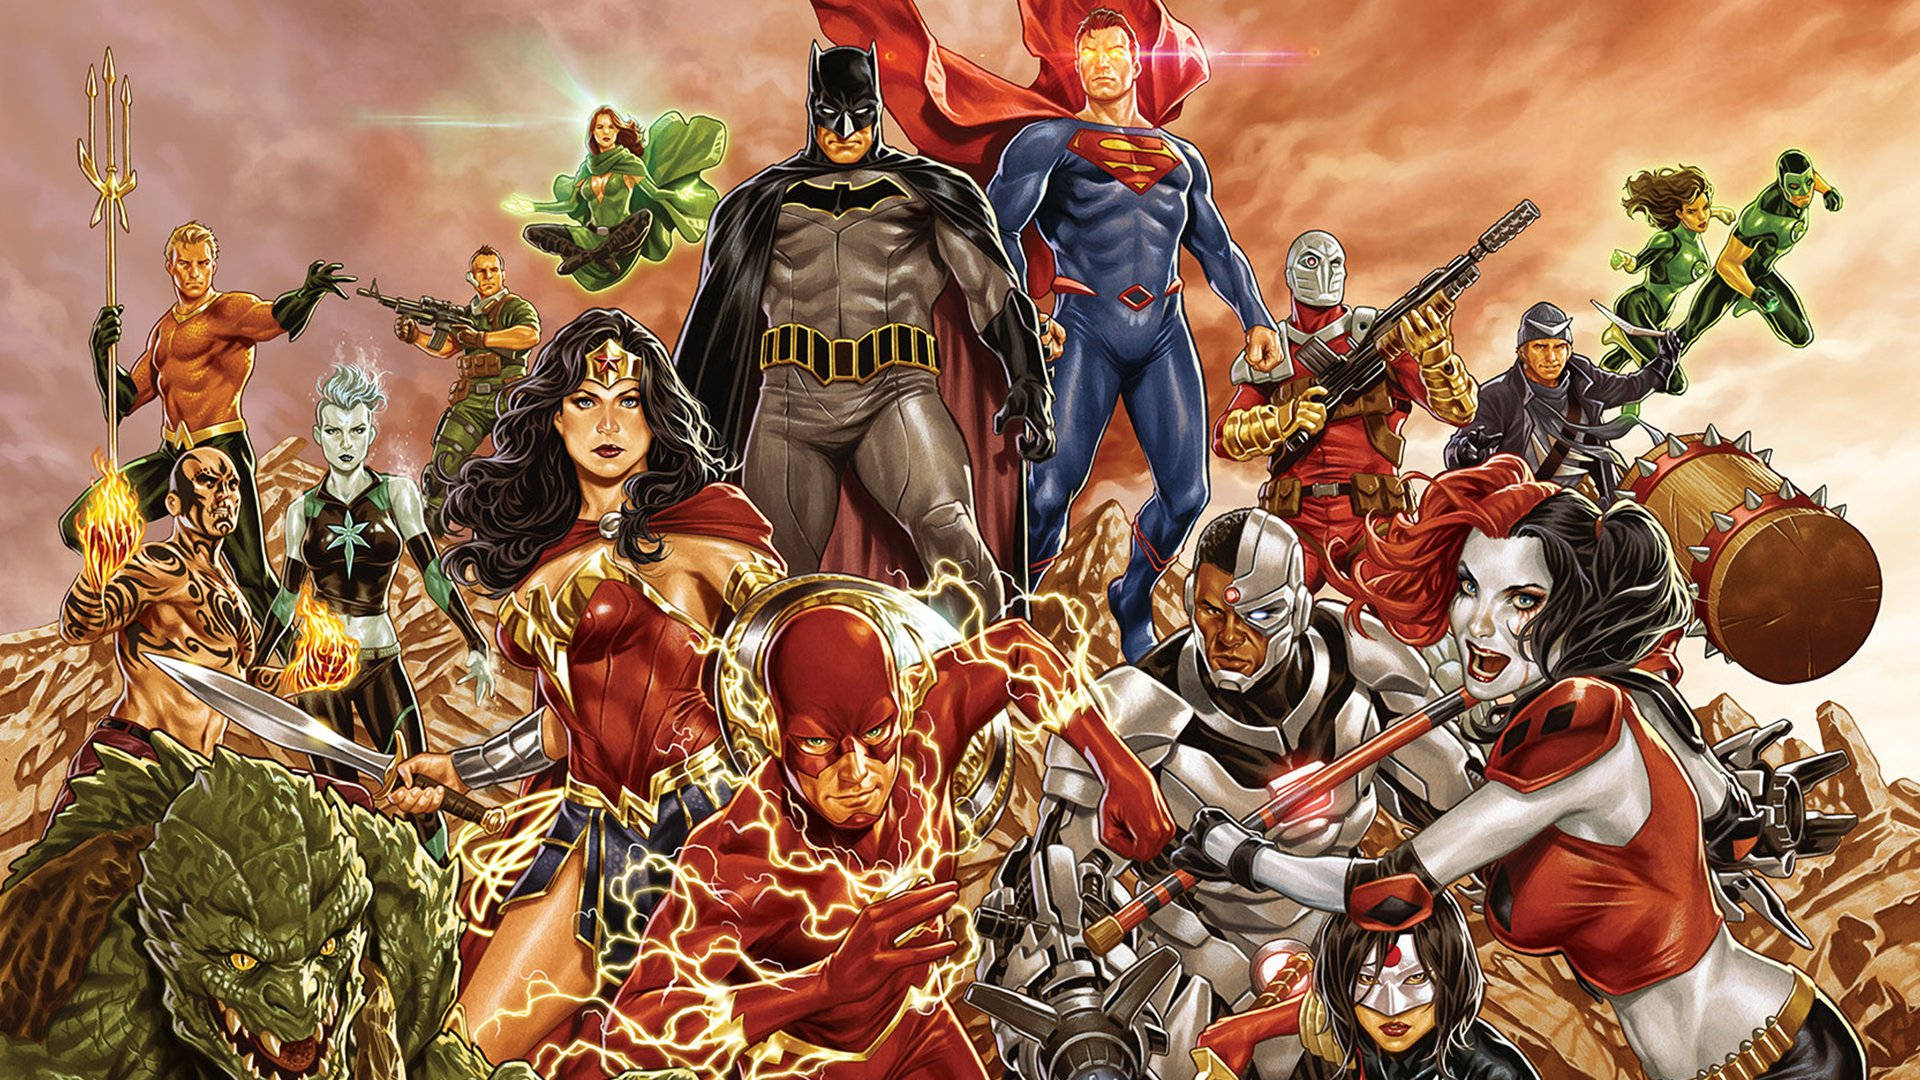 DC Superheroes In The Red Sky Wallpaper